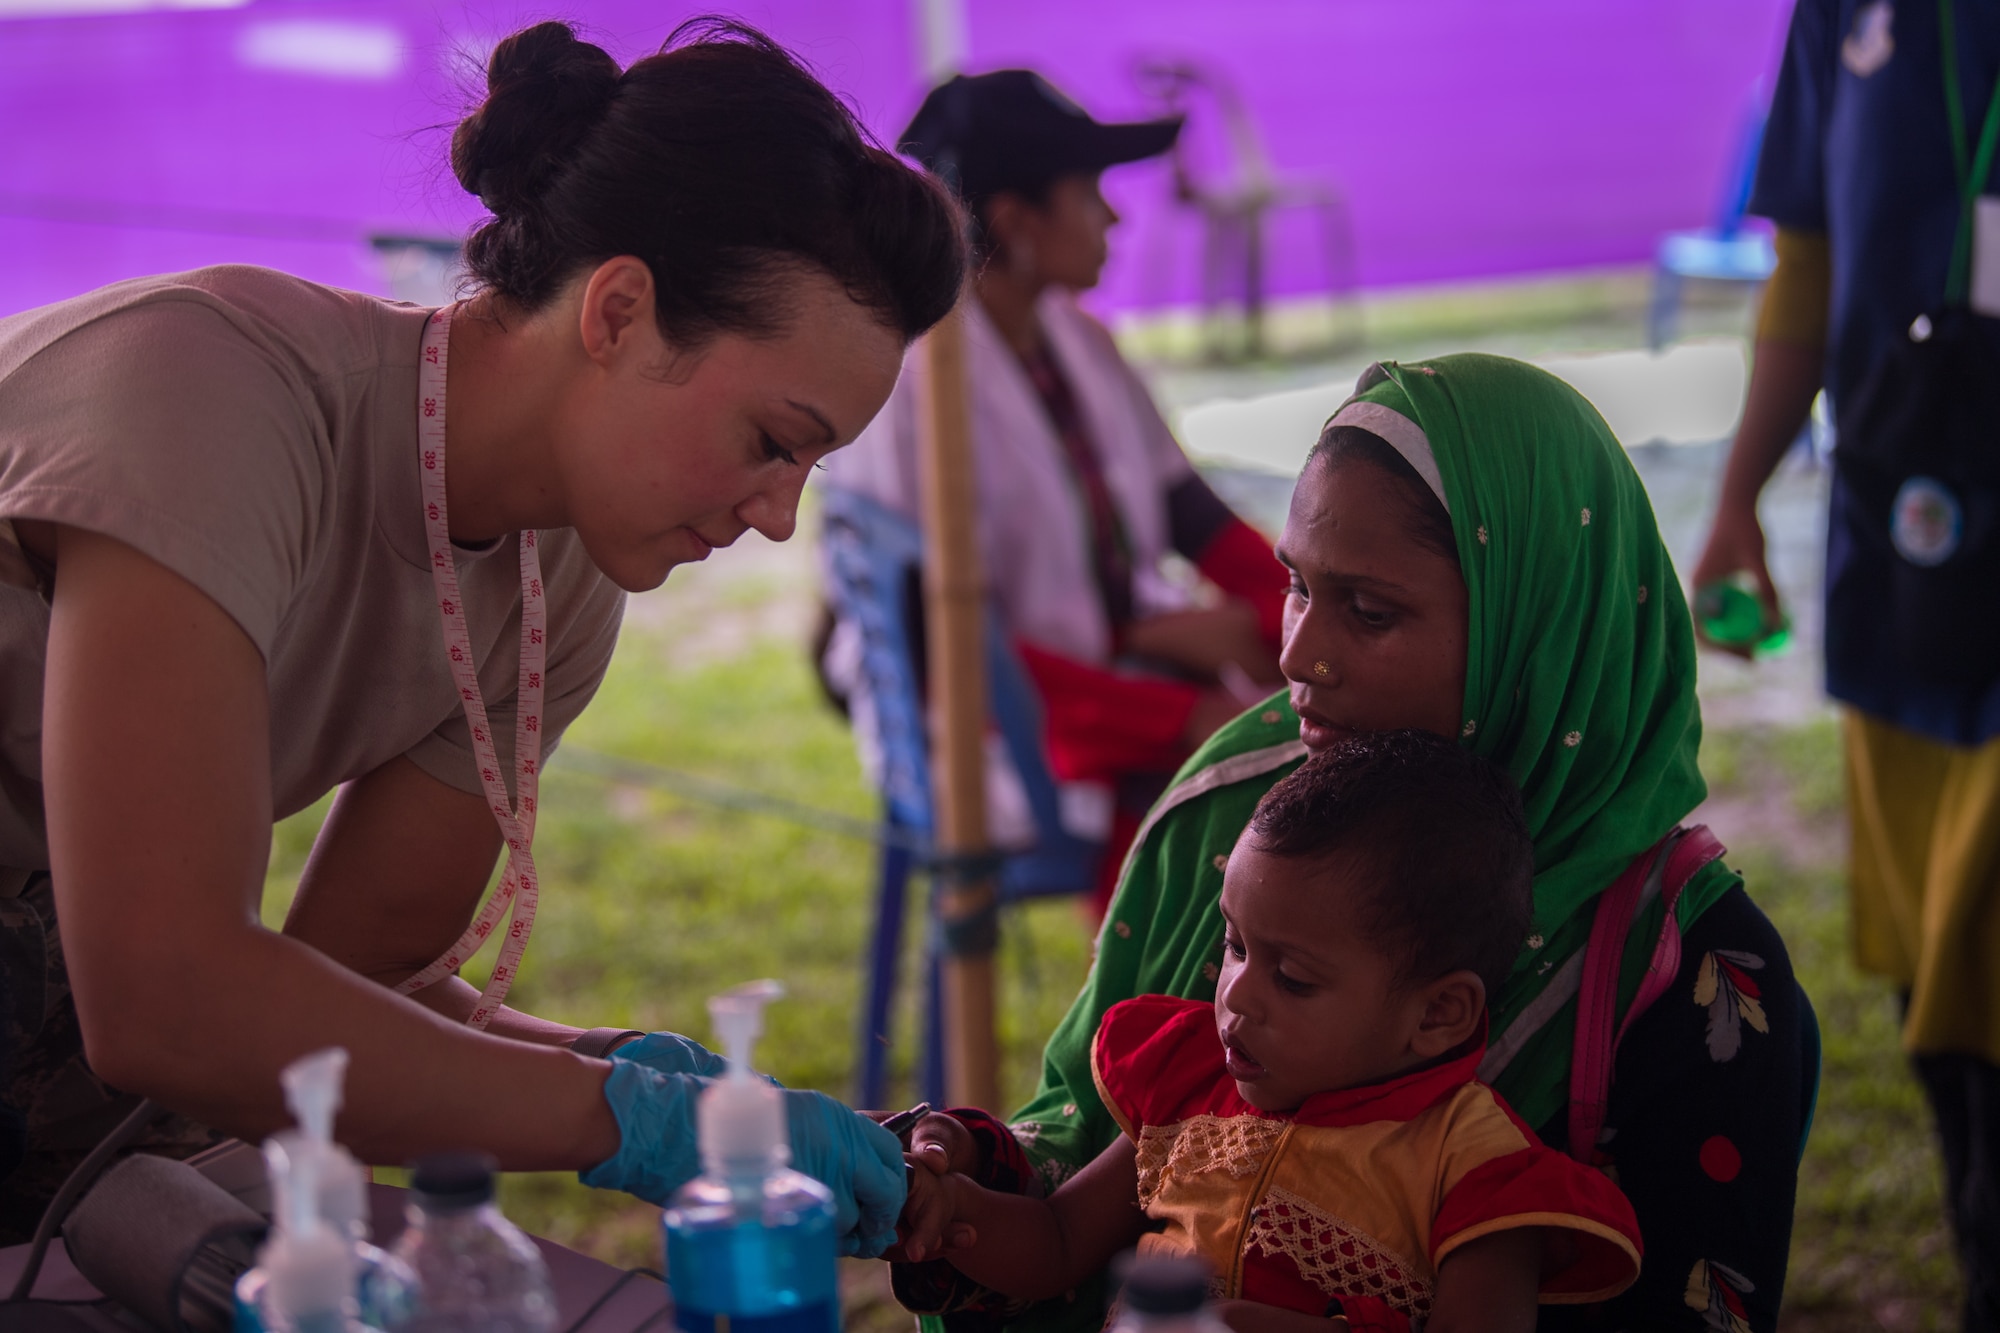 U.S. Air Force Tech. Sgt. Stephanie Blake, 354th Medical Group paramedic, Eielson Air Force Base, Alaska, checks vitals for a Bangladeshi child during Pacific Angel 19-1 in Lalmonirhat, Bangladesh, June 23, 2019. The United States developed Pacific Angel to demonstrate the Department of Defense goodwill through global medical outreach and enhancing regional partnerships through humanitarian assistance and disaster relief missions to include medical, dental, optical, engineering assistance and subject matter expert exchanges alongside host-nation service members and regional allies and partners. (U.S. Air Force photo by Staff Sgt. Ramon A. Adelan)